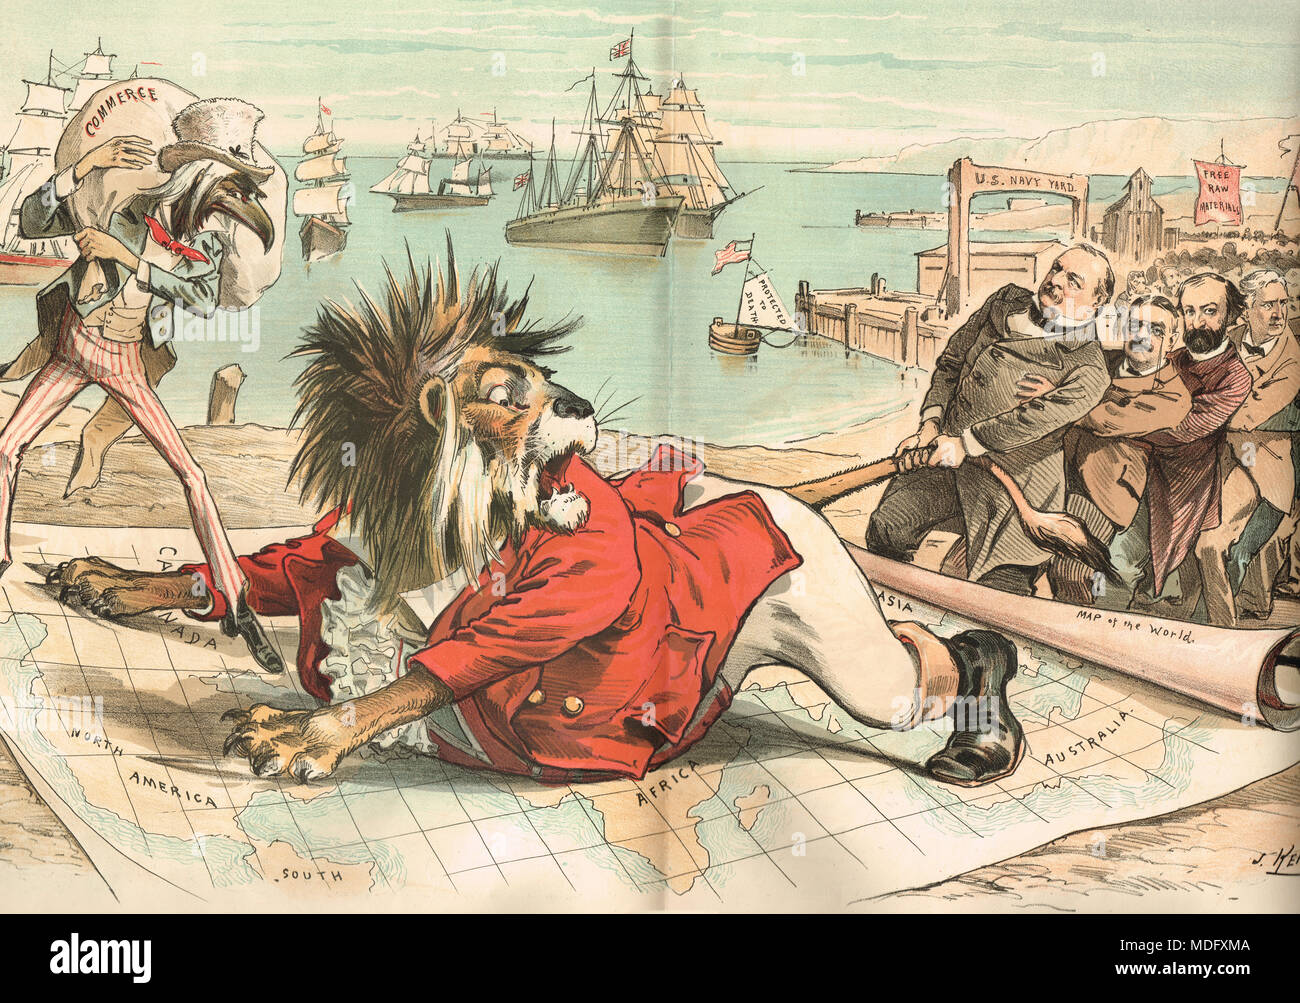 Grover Cleveland, tariff reform, Puck magazine, 1888, taming the British lion, clawing trade from British empire Stock Photo